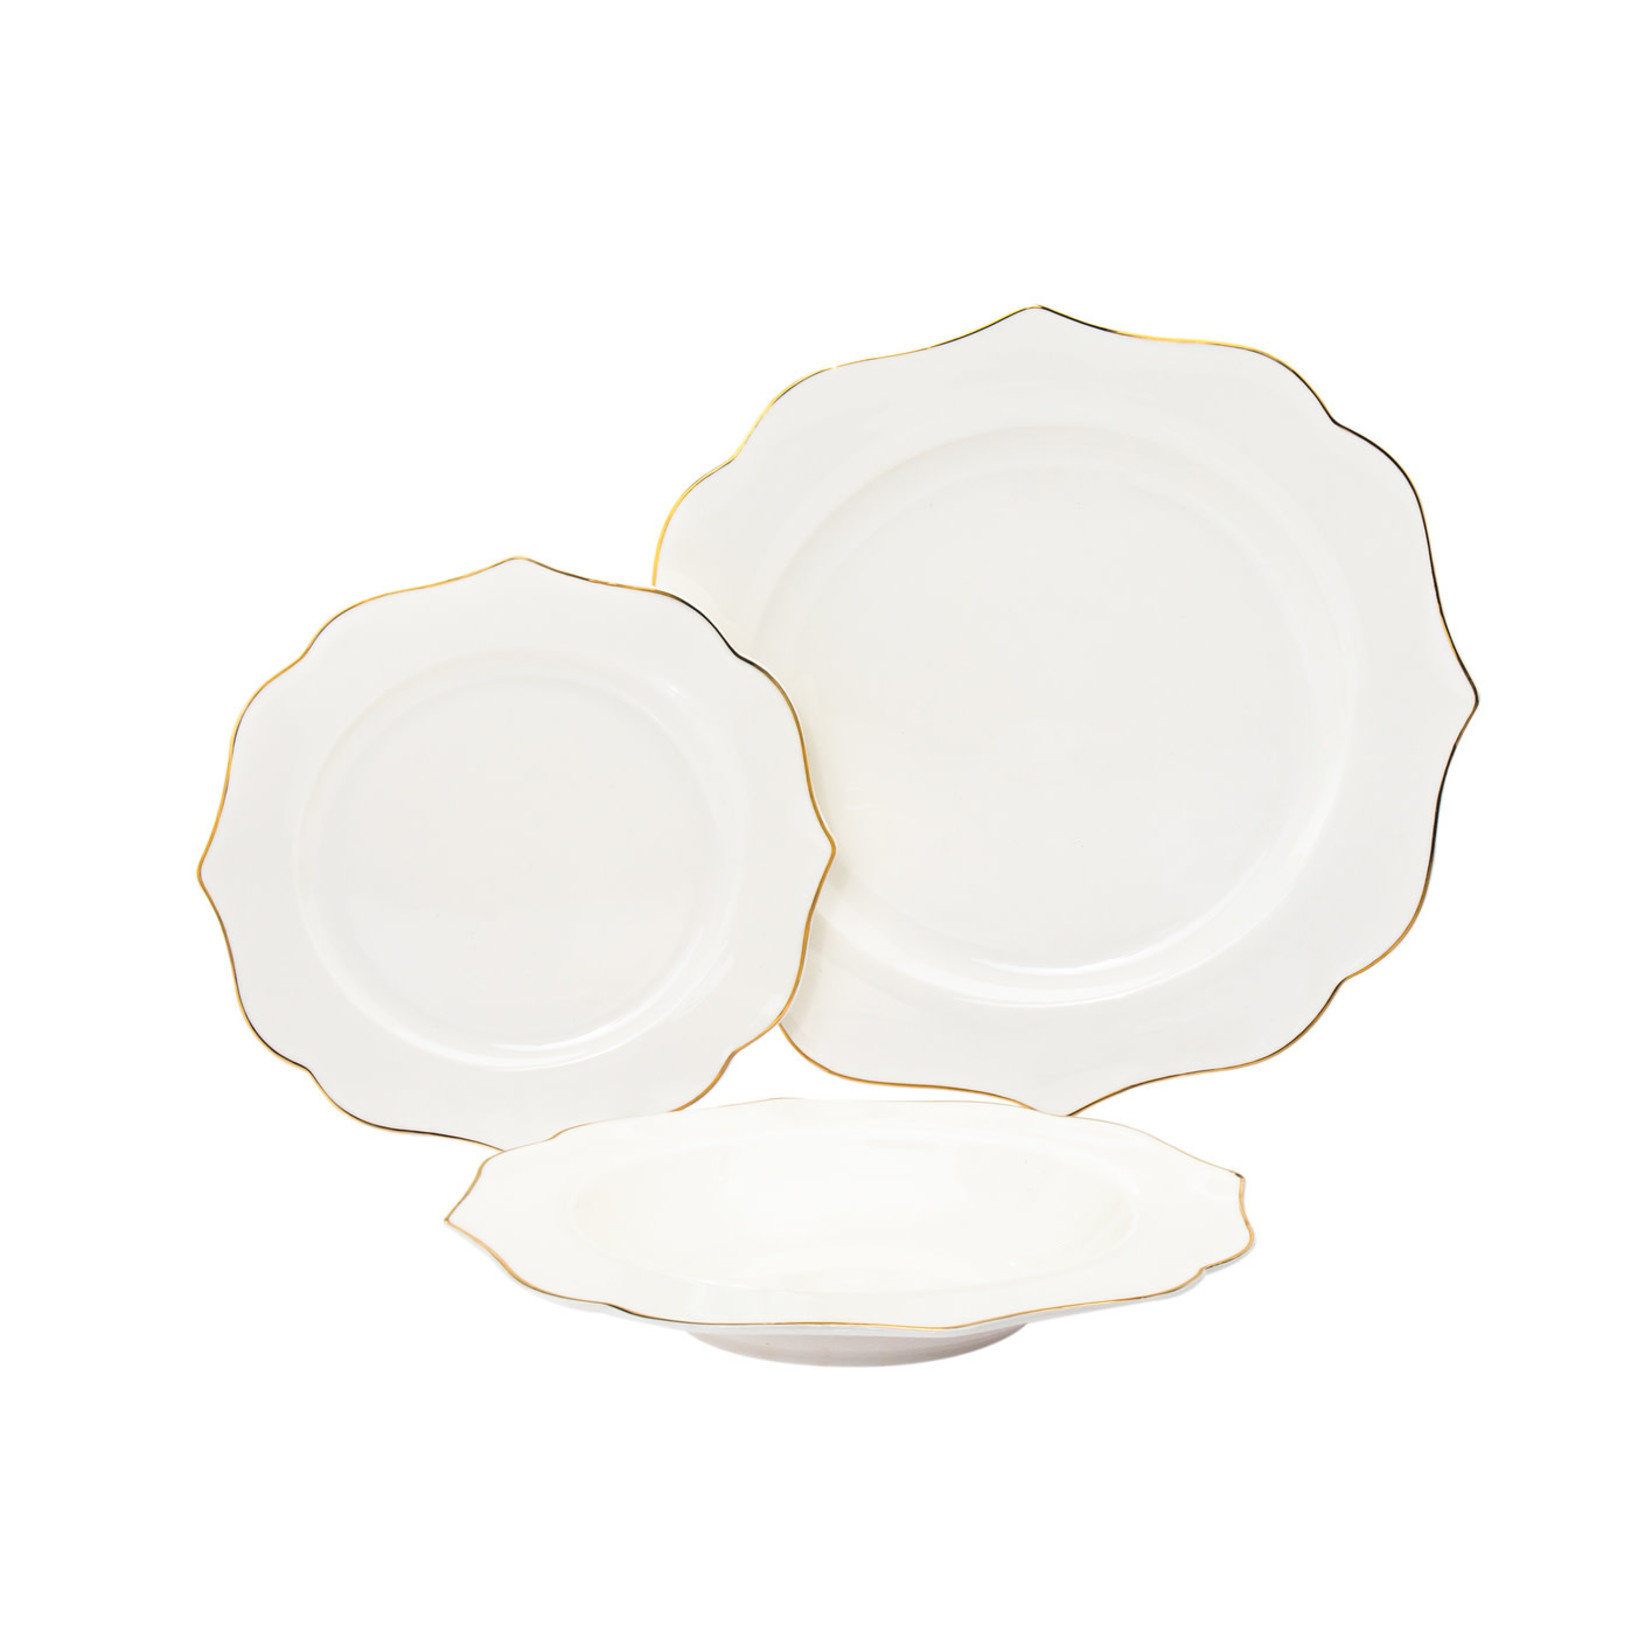 TWS 62169 Arendale Dinnerware Service For 4